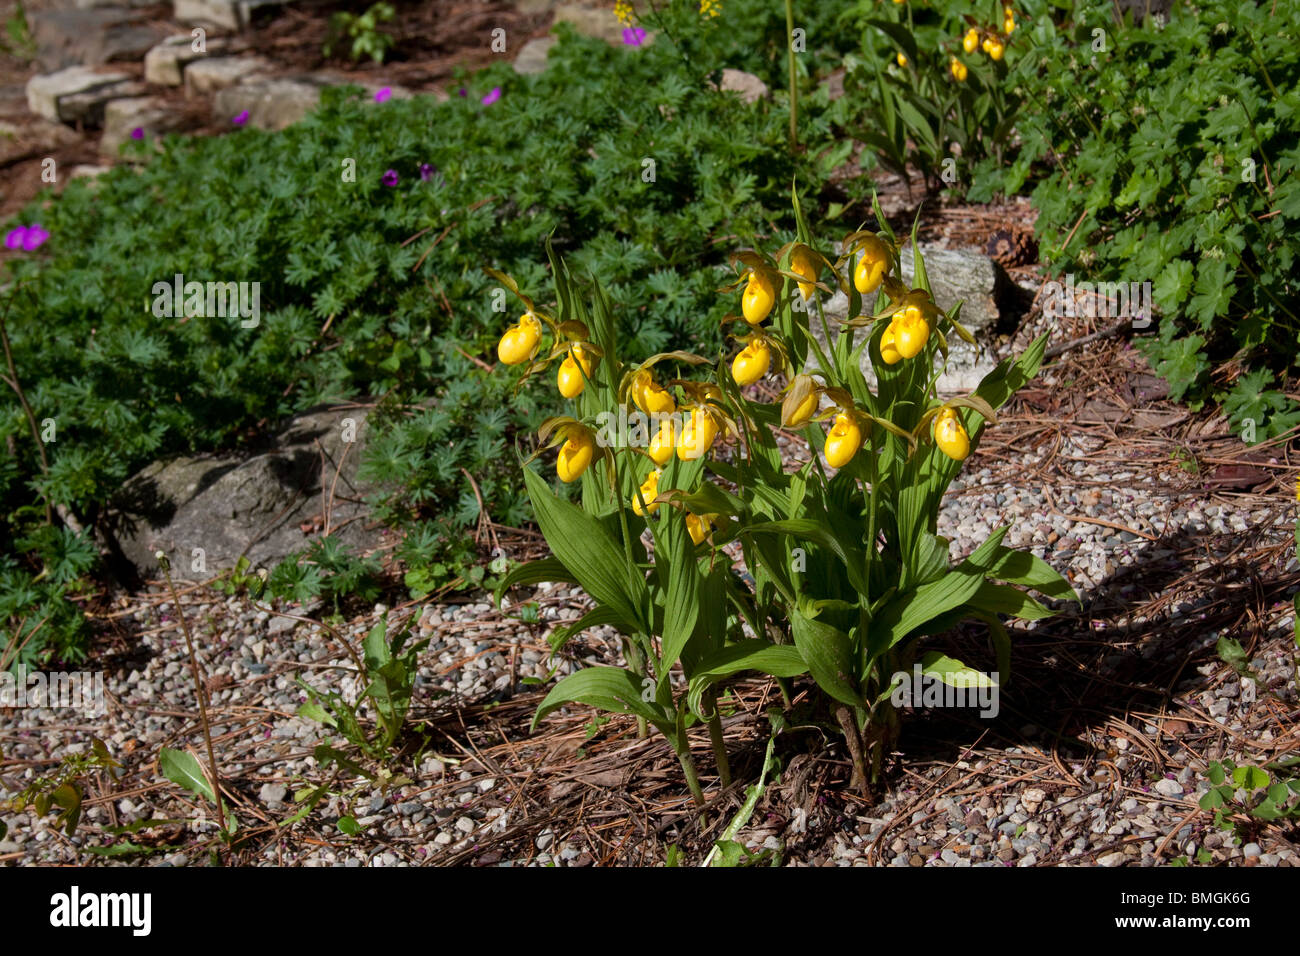 Large Yellow Lady's - Slipper Orchids Cypripedium calceolus variety pubescens in garden setting Eastern USA Stock Photo